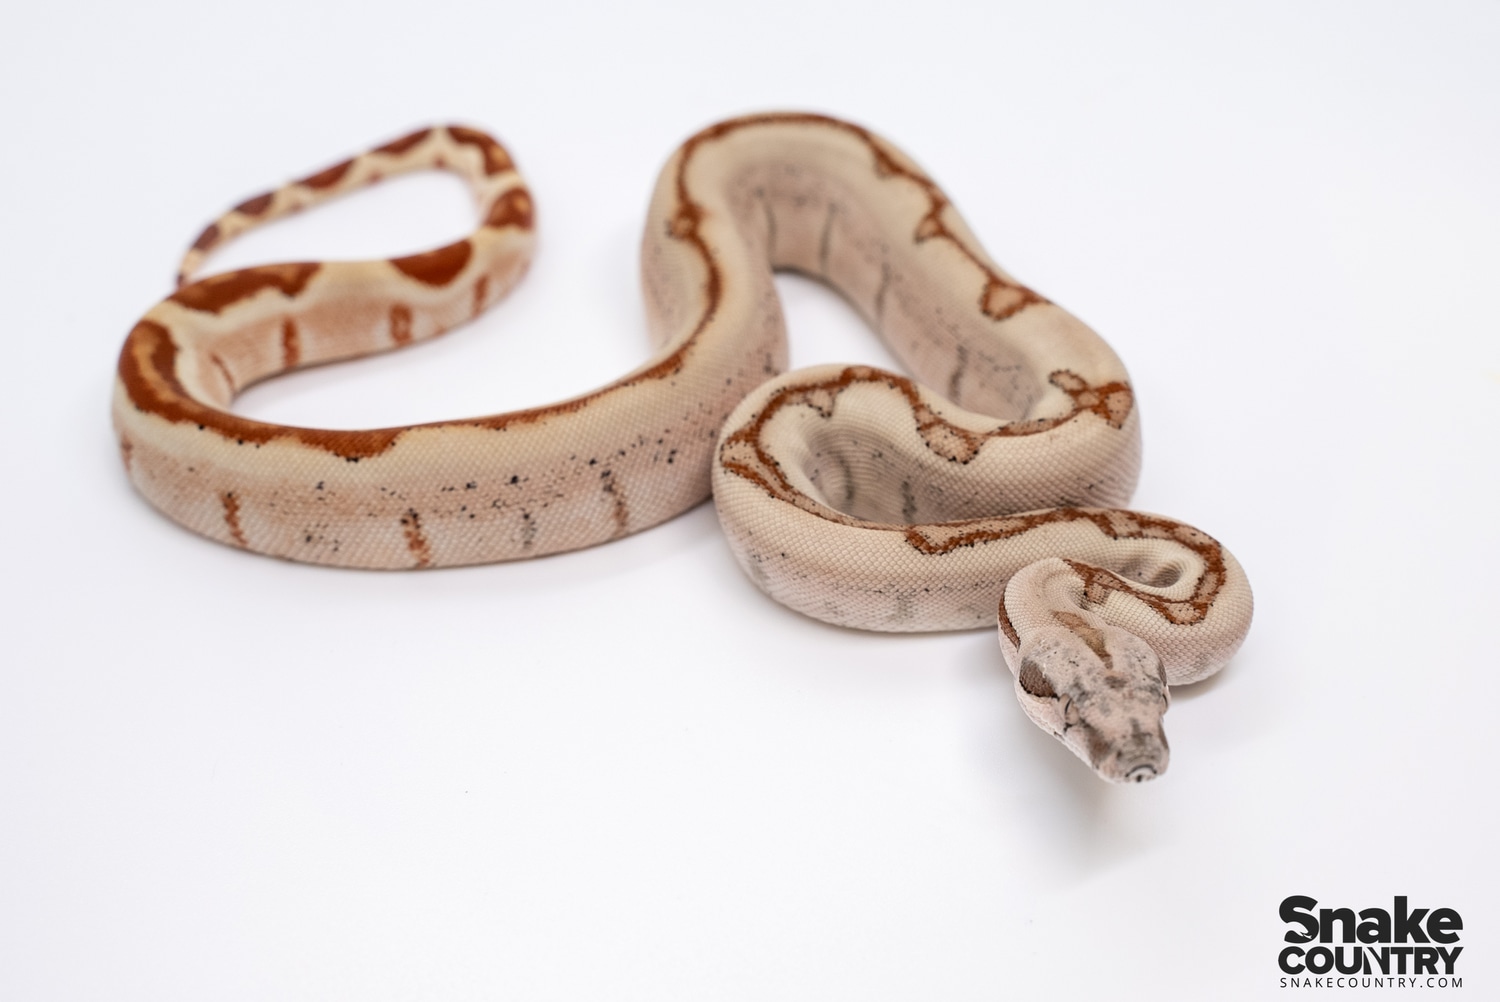 Super Hypo Jungle 66% DH Blood Kahl Albino Boa Constrictor by Snake Country